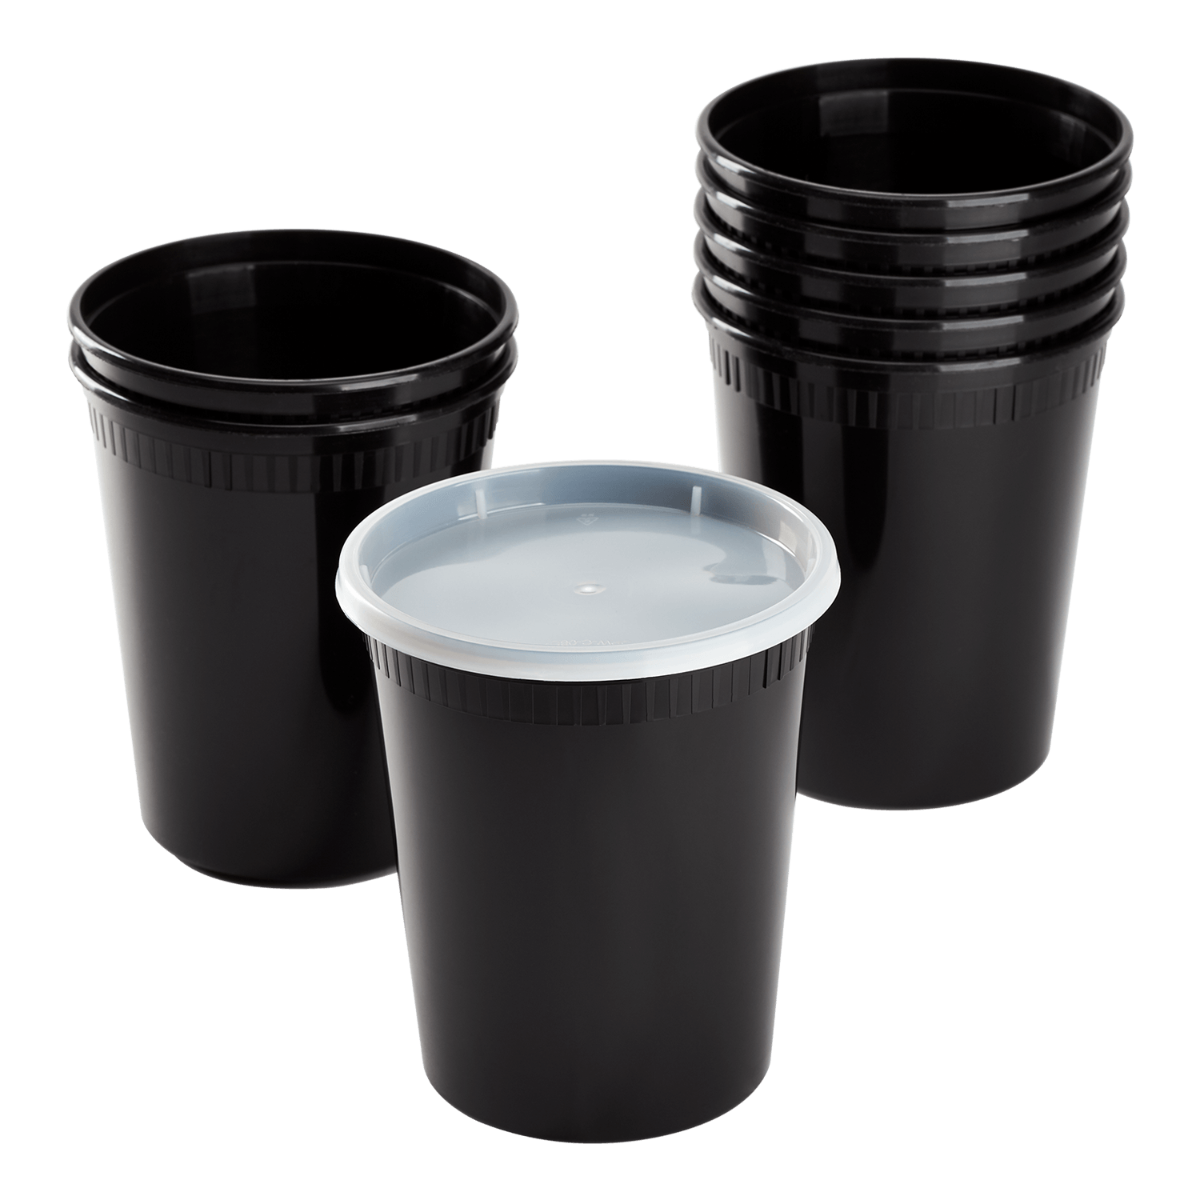 16,24,32 oz PP Injection Molded Deli Containers w/lids (240 sets) |  paperbox-by-andrew